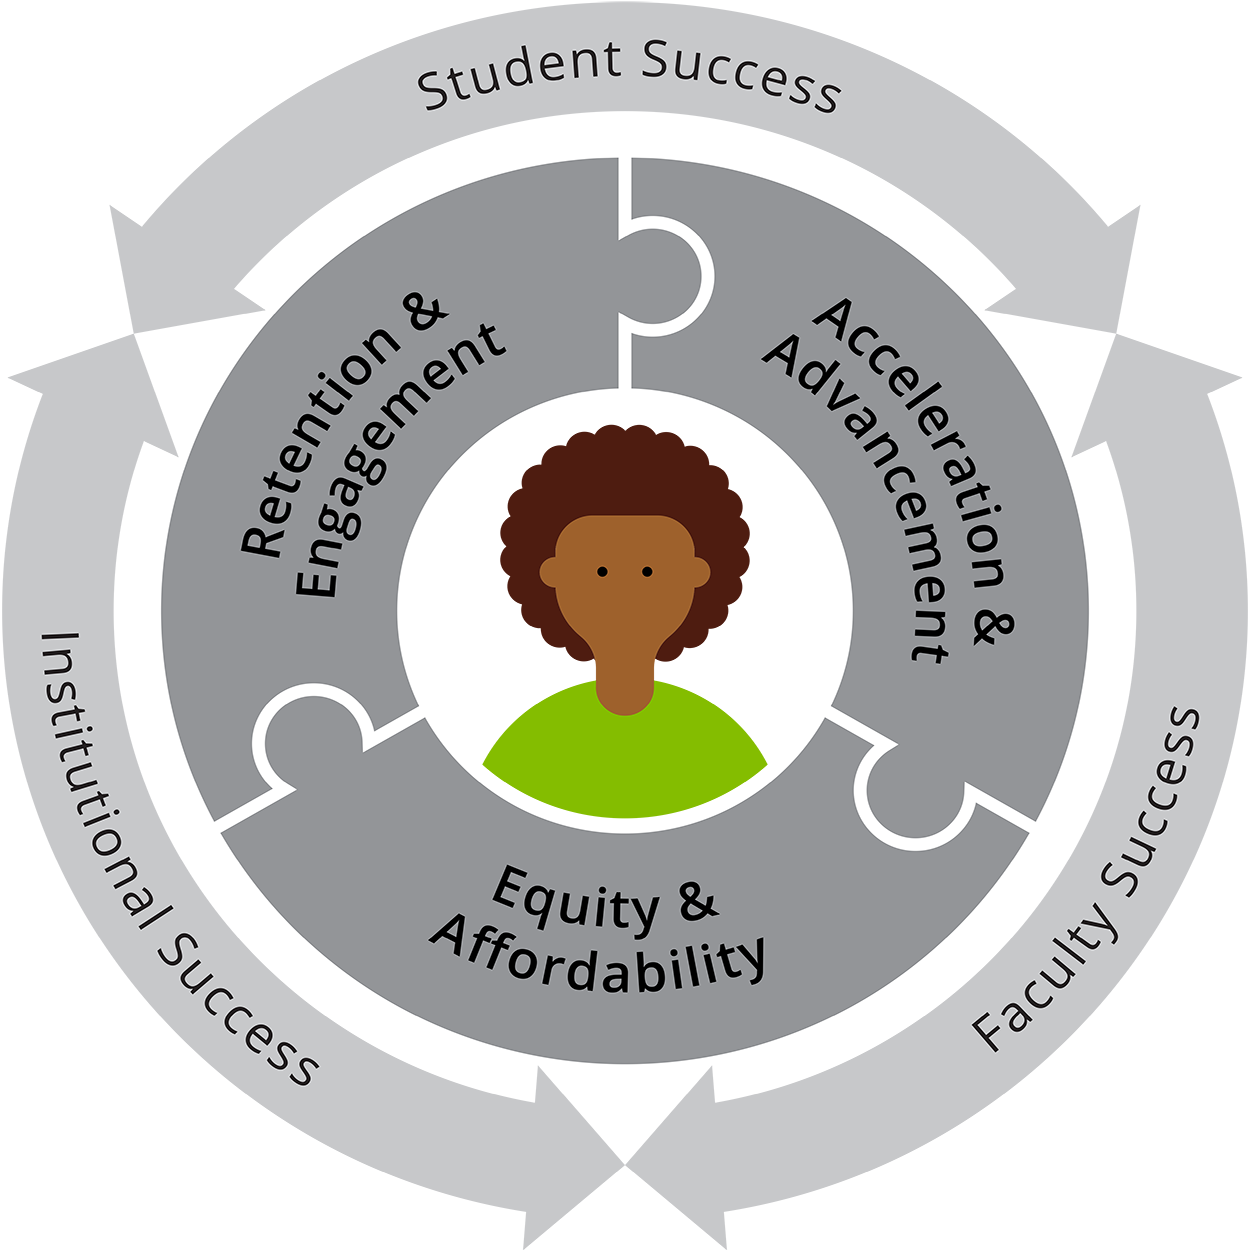 Gray circle graphic with "Student, Institutional, and Faculty Success" written on the outer ring. The middle ring is three connecting puzzle pieces that read: Retention & Engagnement, Acceleration & Advancement, and Equity & Affordability. In the center is an image of a student in color.